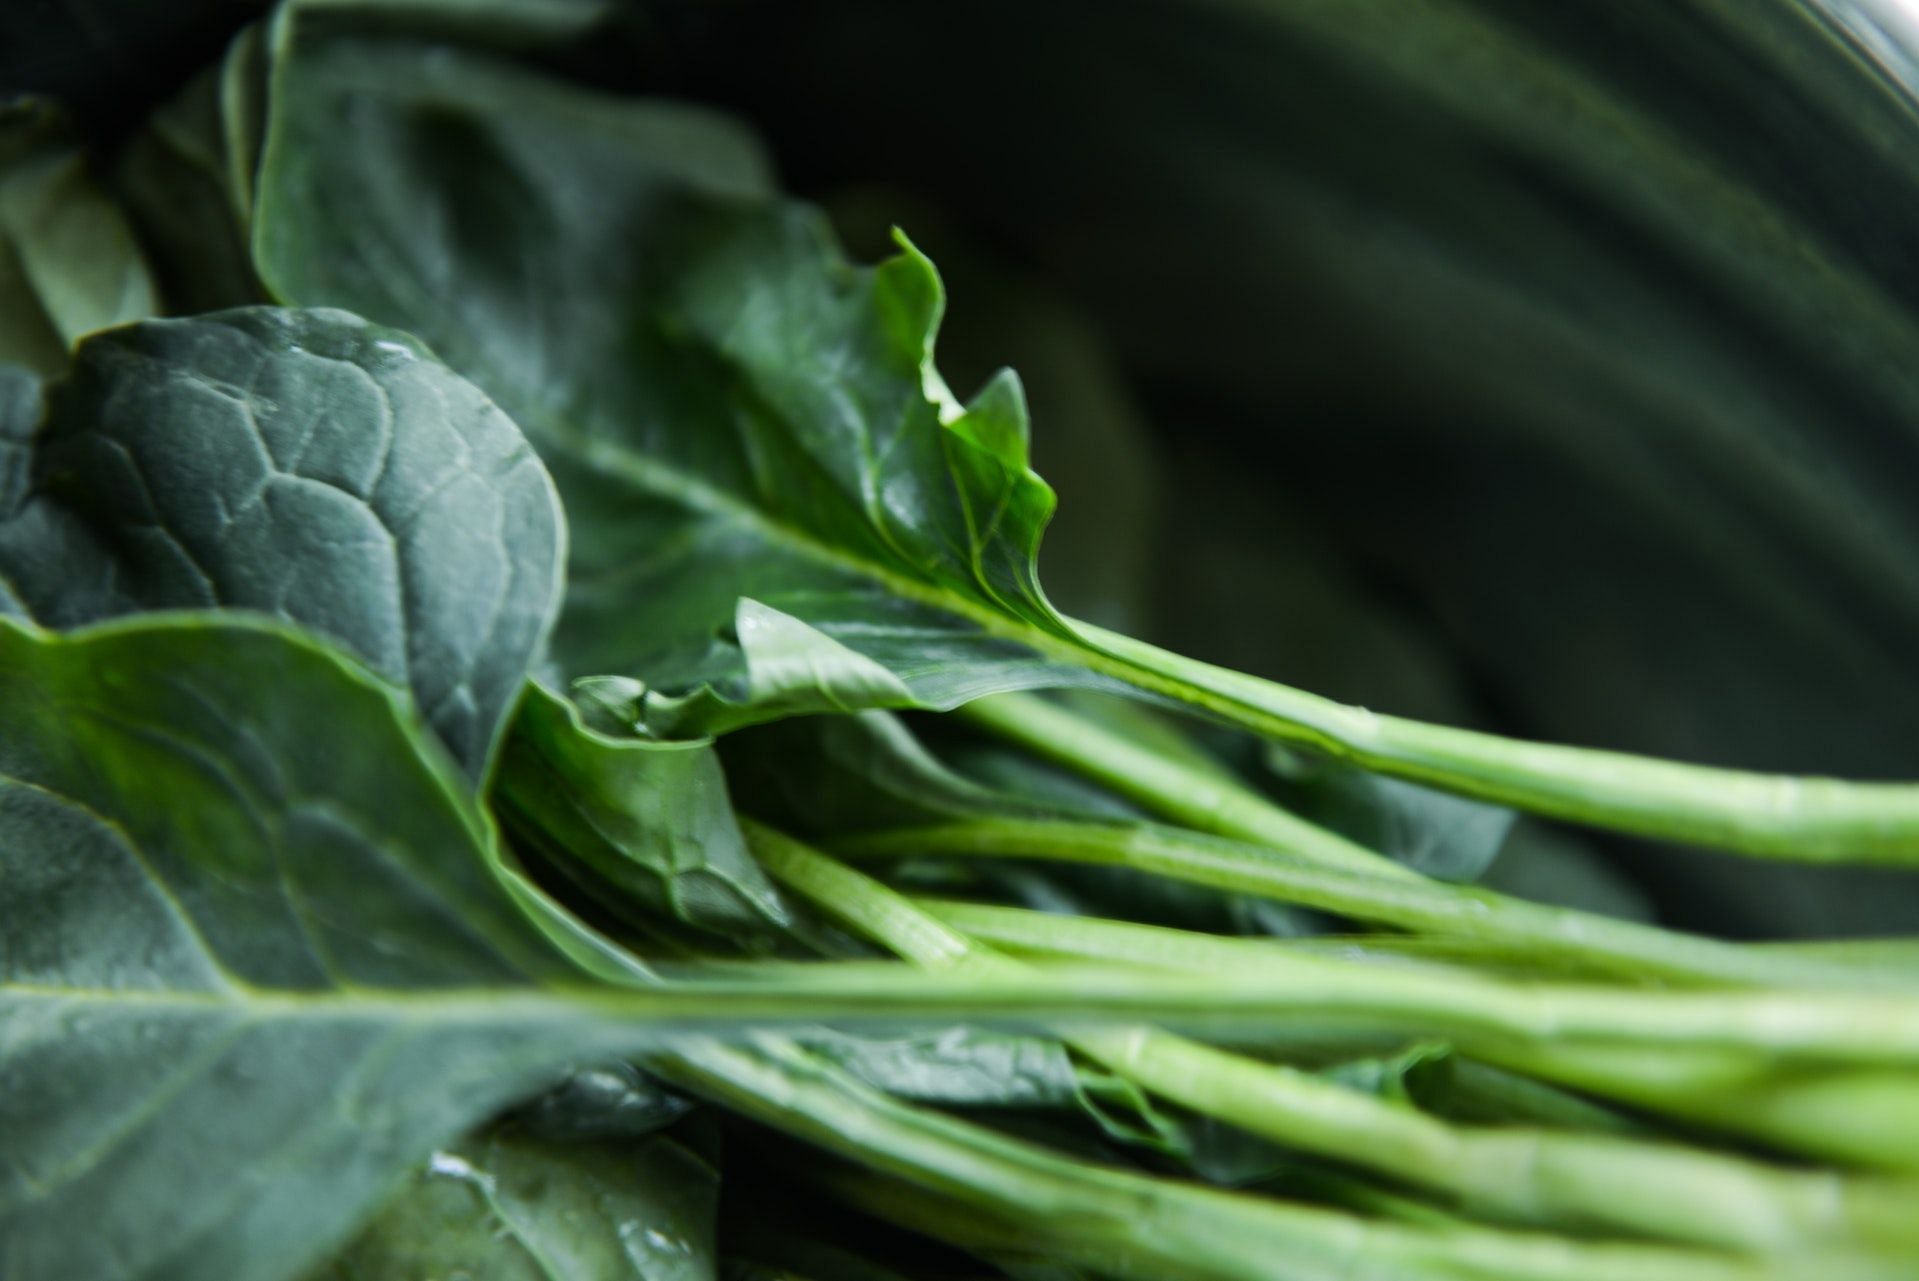 Leafy green vegetables are best foods for the brain. (Photo via Pexels/Cats Coming)